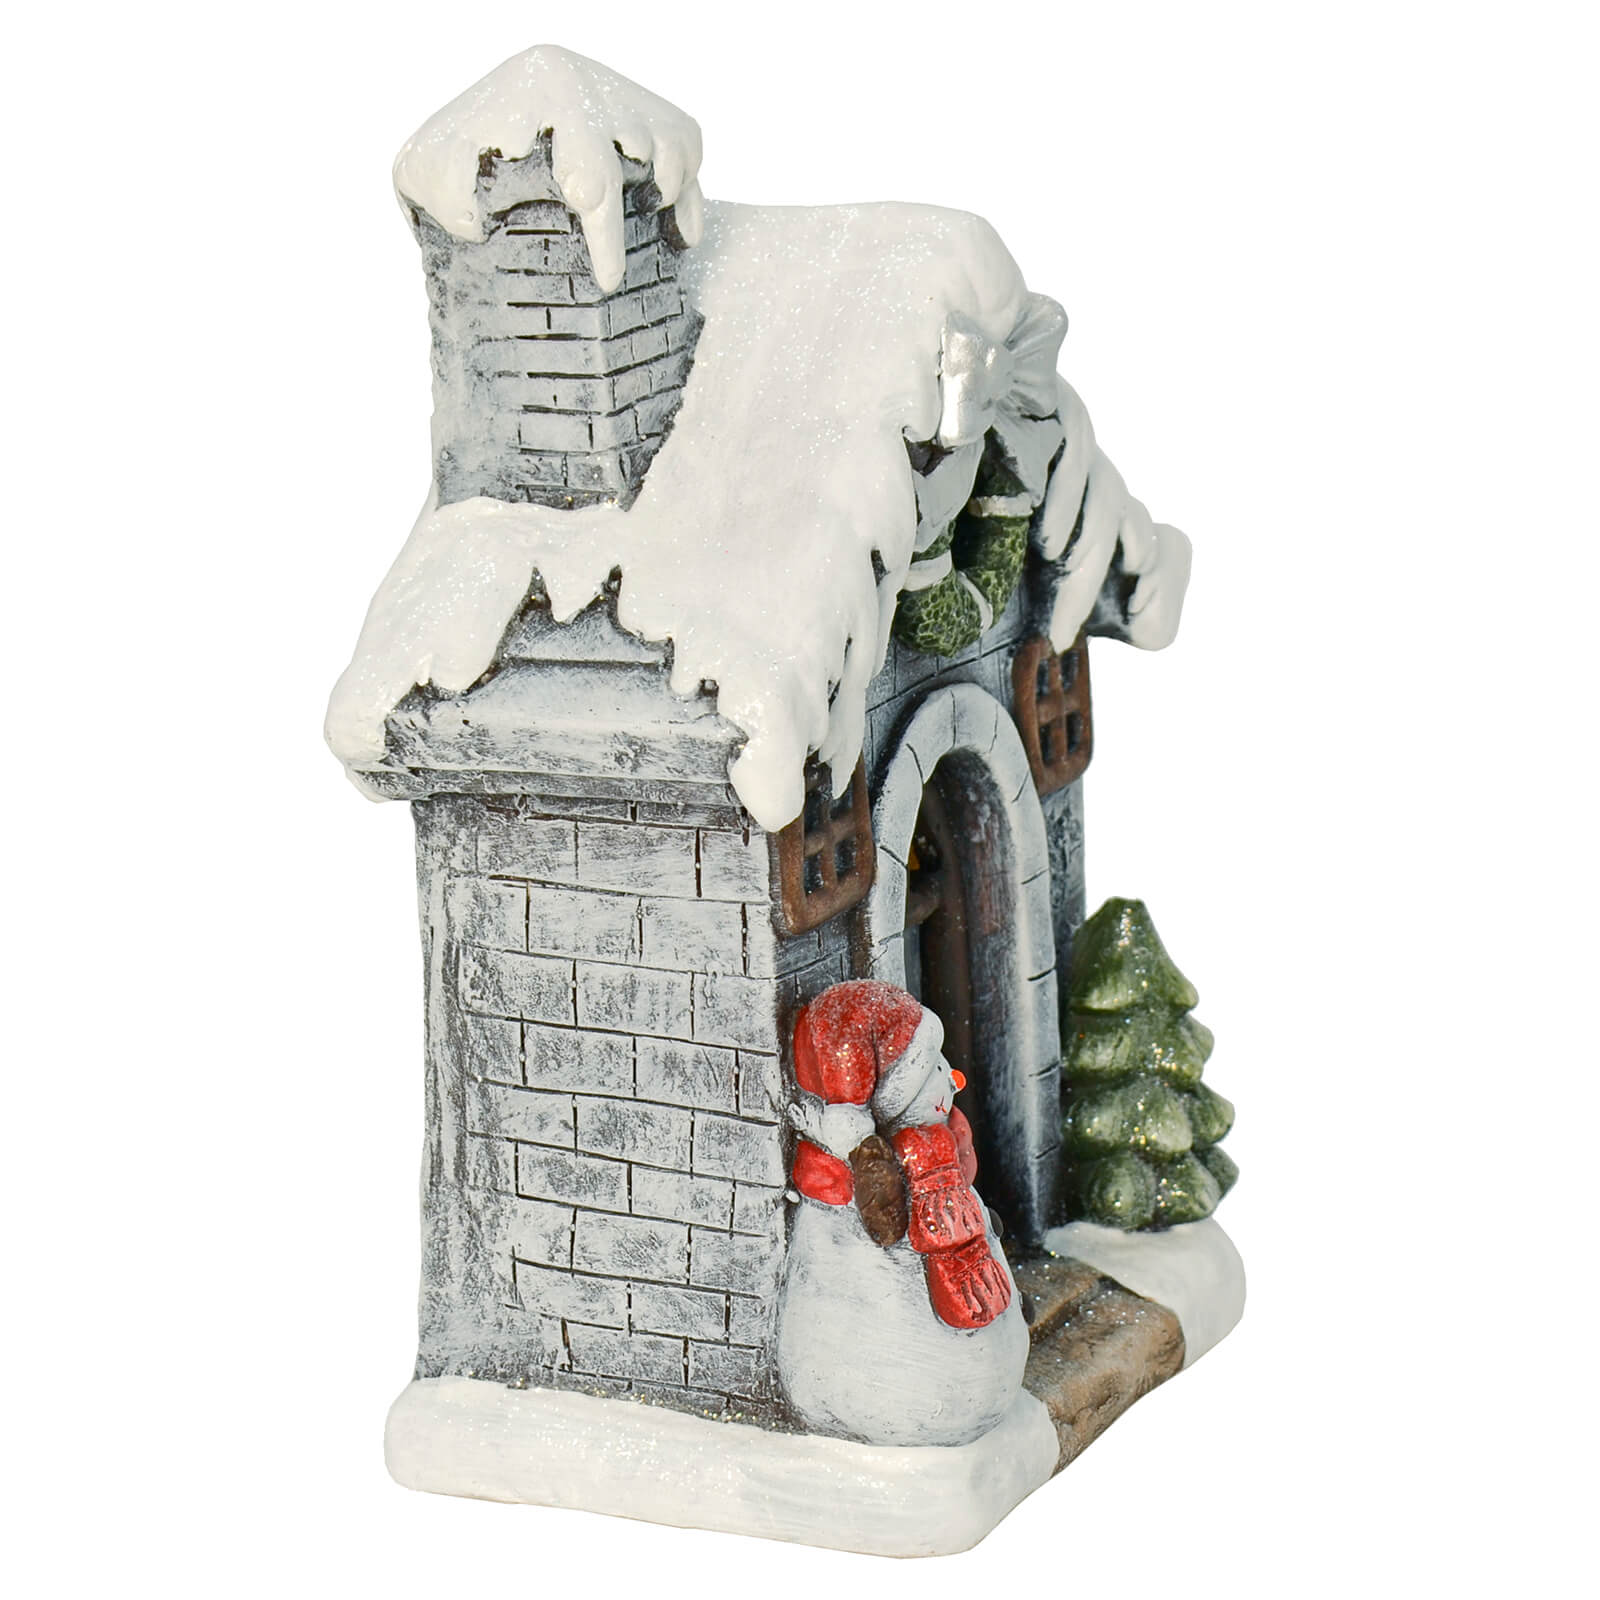 Side view of Christmas ornament with snowman and tree at the door of a snow covered, grey brick house with Christmas wreath